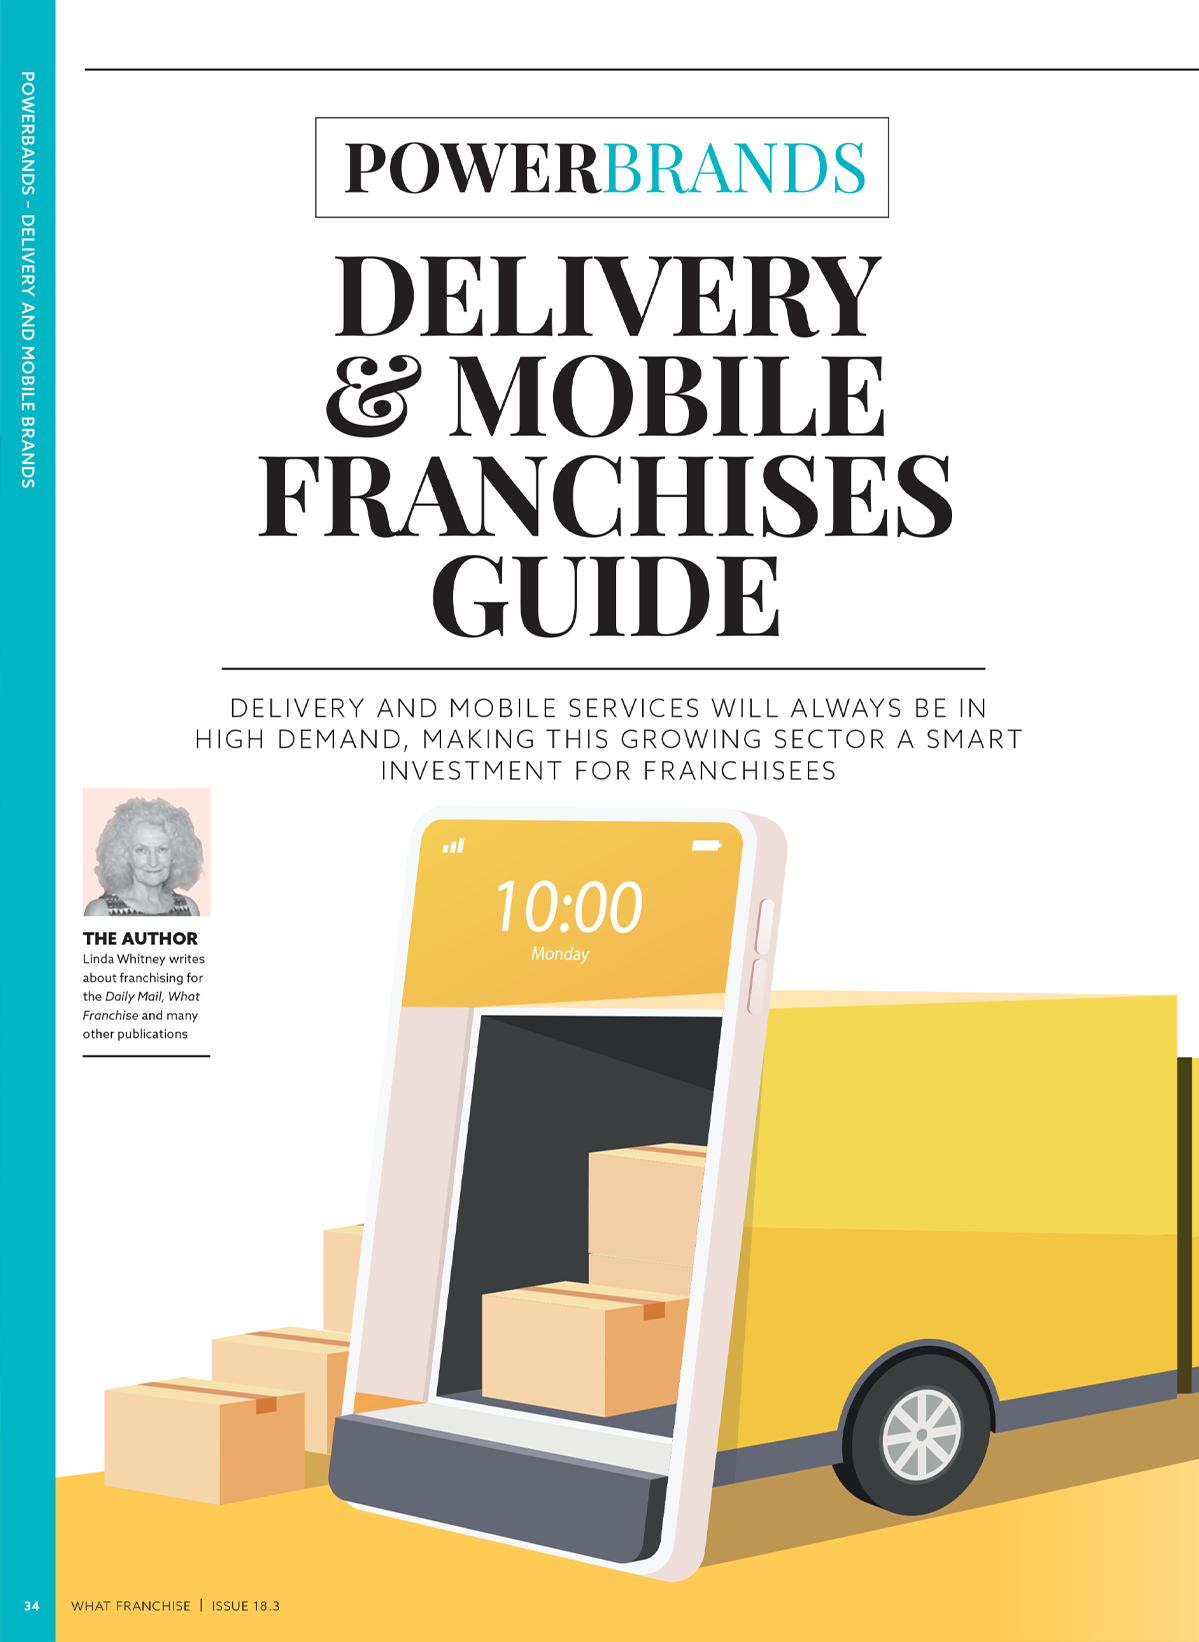 Powerbrands: Delivery & Mobile Franchises Guide